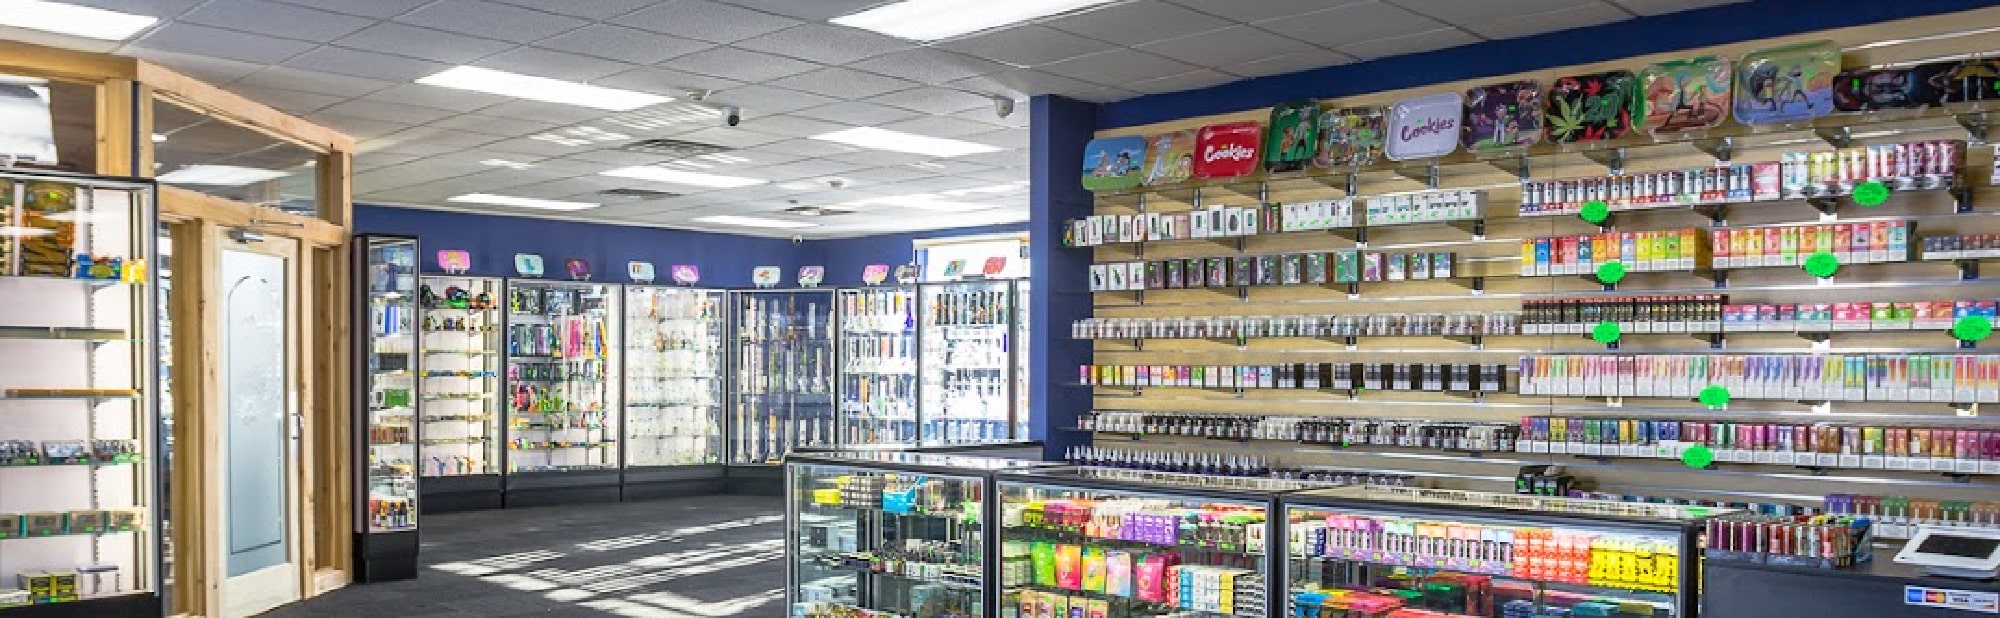 image of sals tobacco and vape spartanburg sc